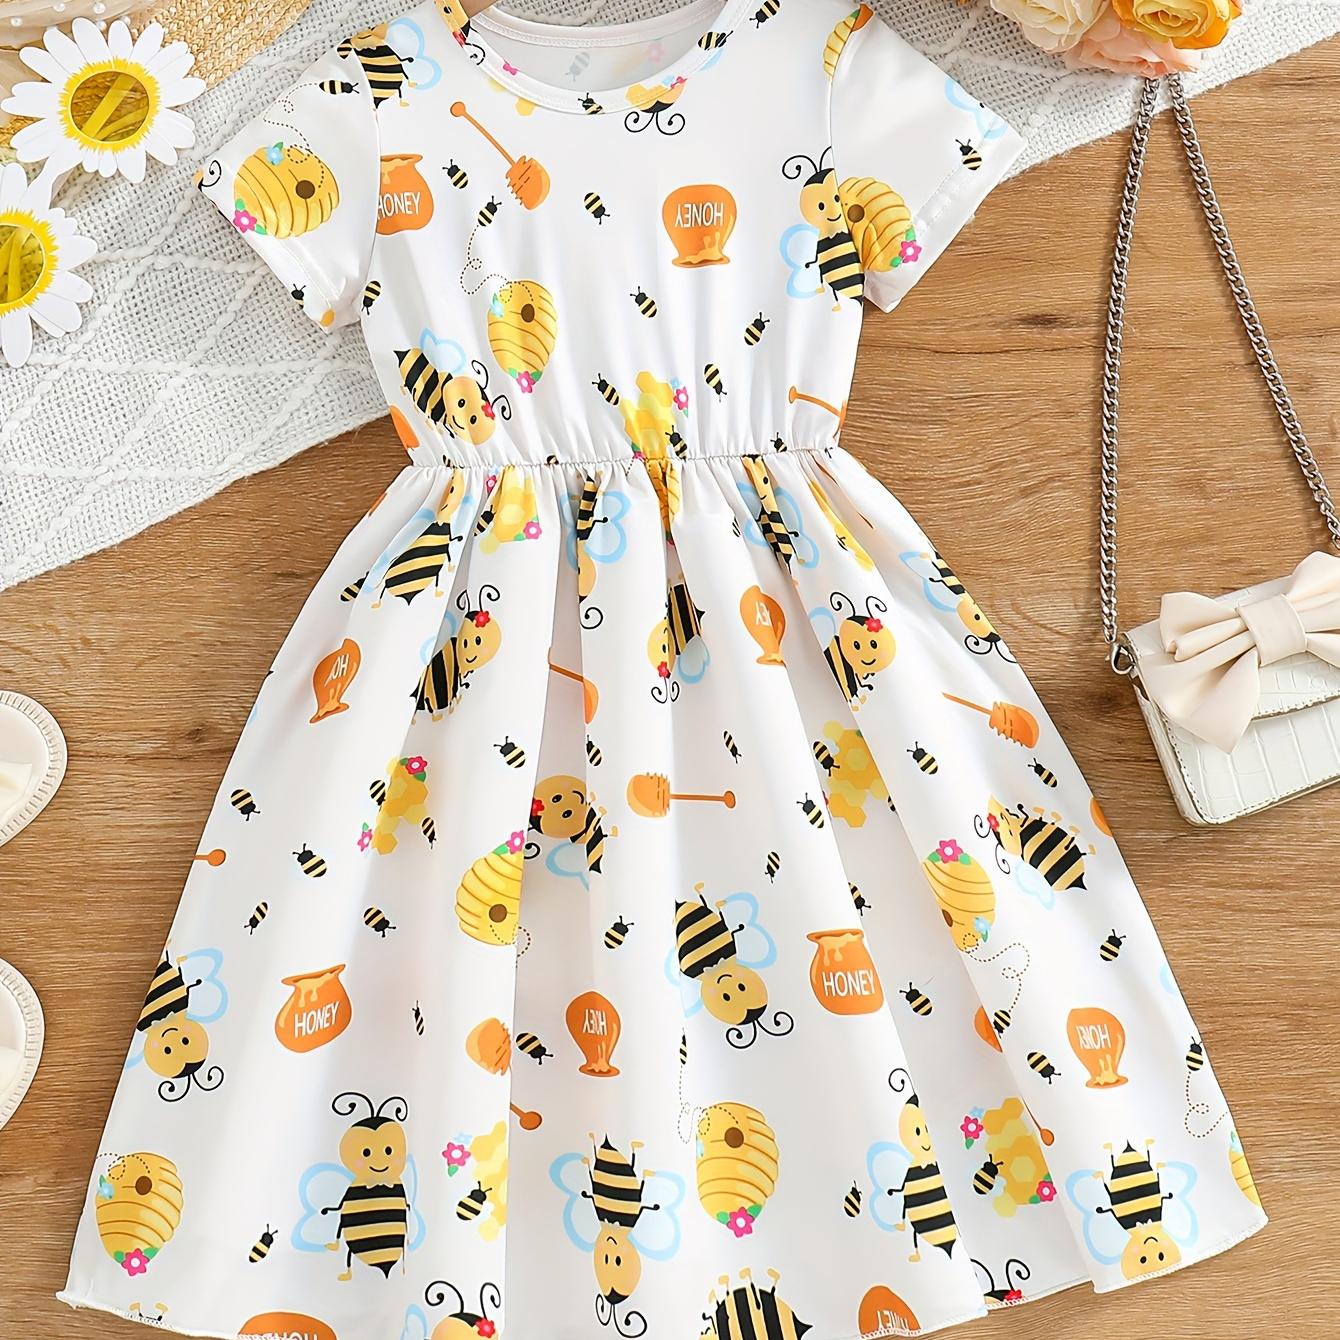 

Girls Cute Bees Graphic Short Sleeve Dress Holiday Summer Casual A-line Dresses